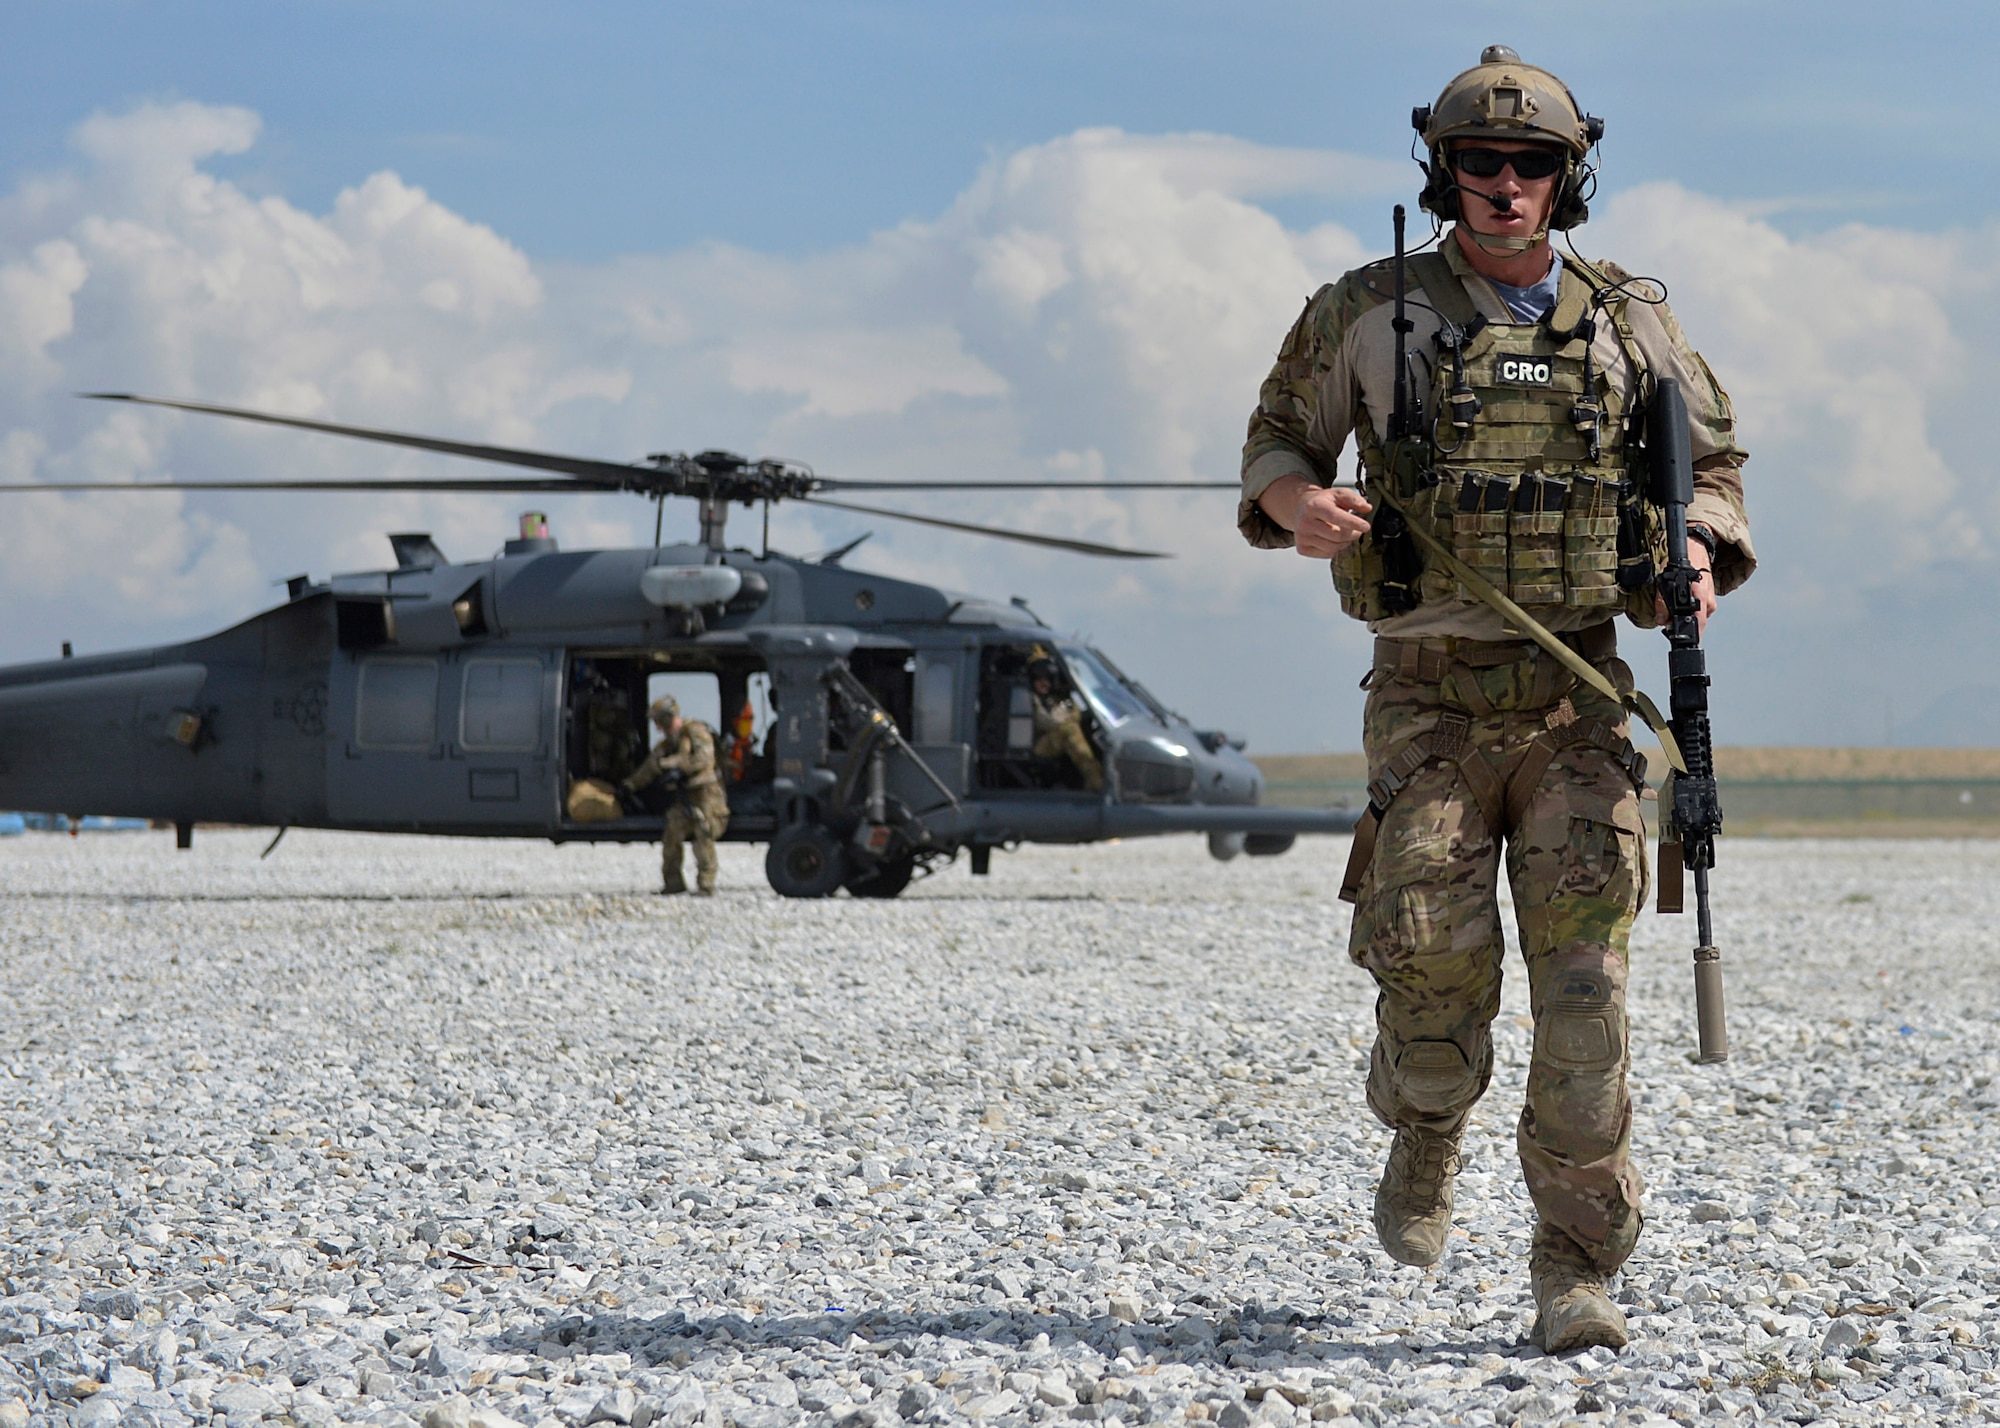 U.S. Air Force 1st Lt. Christopher Goetz, 83rd Expeditionary Rescue Squadron Combat Rescue Officer, walks away from a HH-60 Pave Hawk helicopter during a training scenario at Bagram Airfield, Afghanistan May 5, 2014.  During the training, rescue crews flew on HH-60G Pave Hawks to the simulated point of injury, provided security, treated patients, prepared them for travel, and safely departed the area.  Goetz is deployed from Moody Air Force Base, Ga. (U.S. Air Force photo by Staff Sgt. Evelyn Chavez/Released)